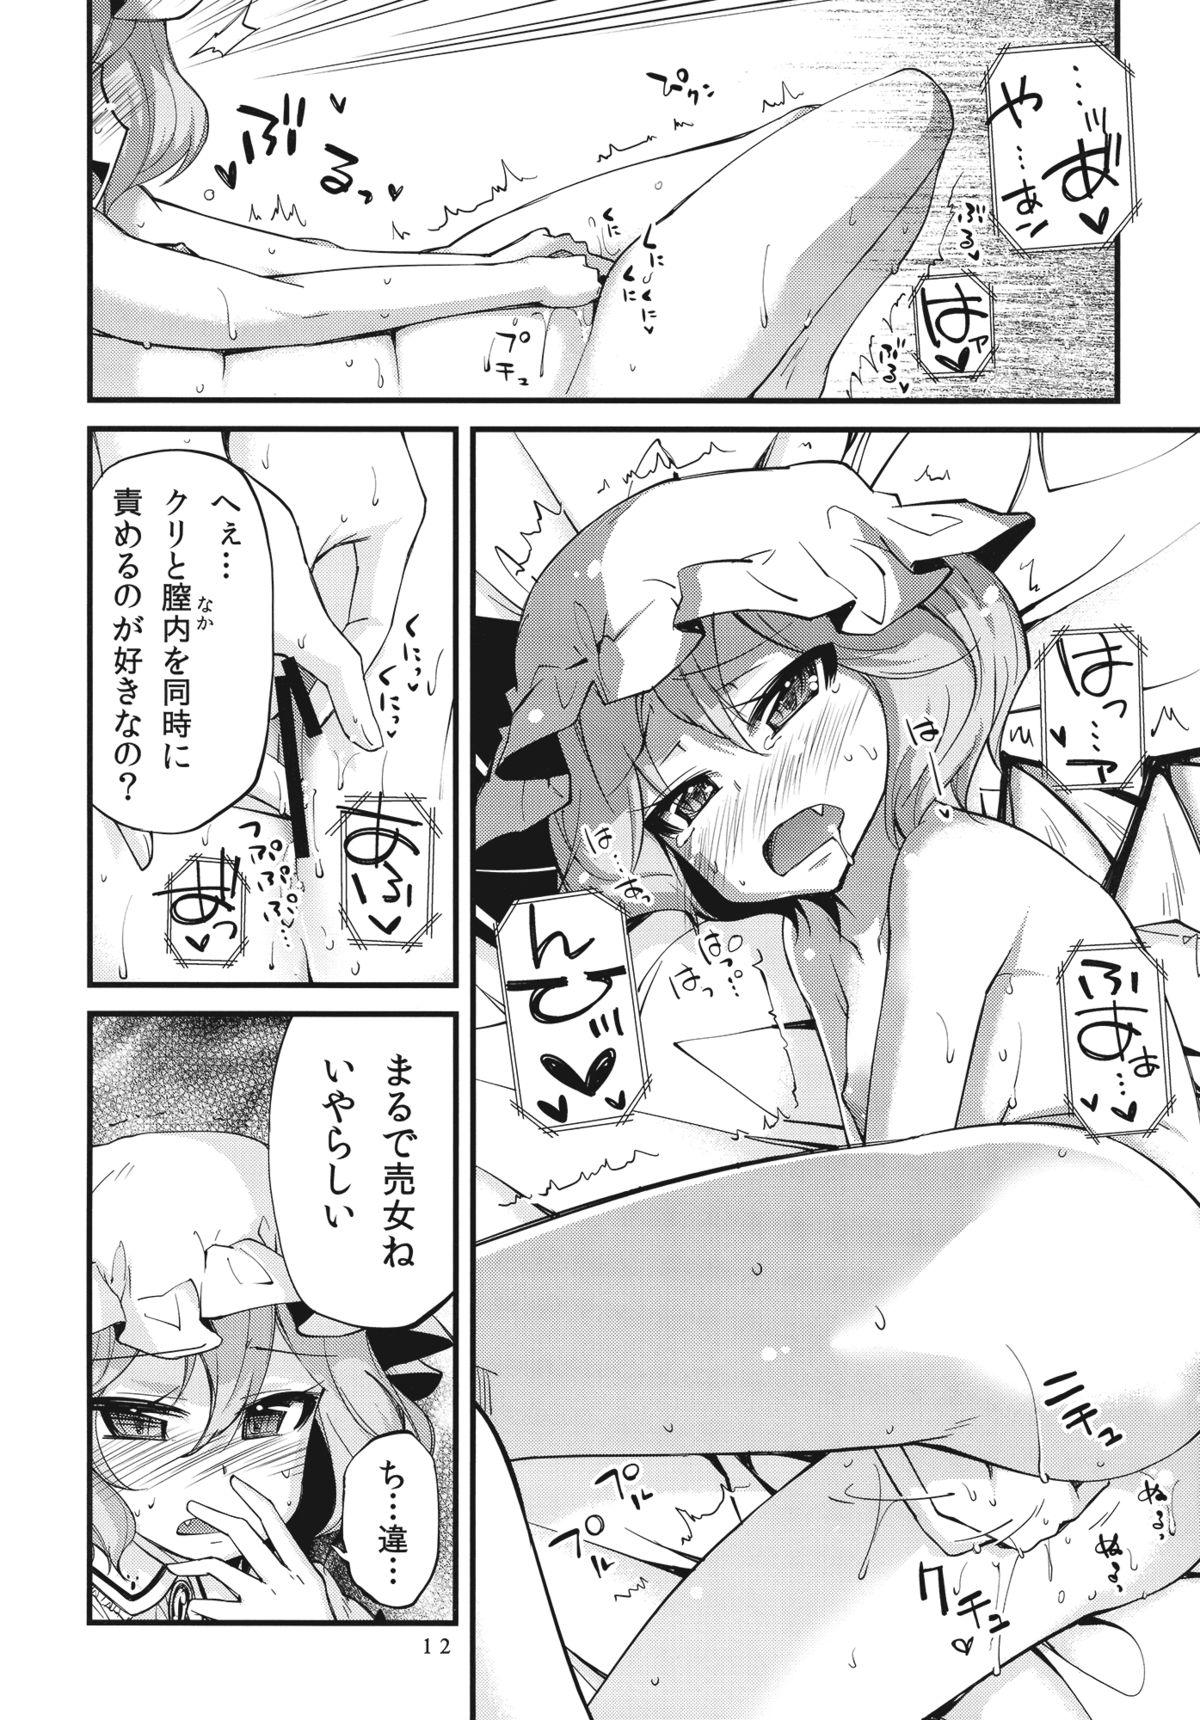 Innocent .REC - Touhou project Gostosas - Page 12